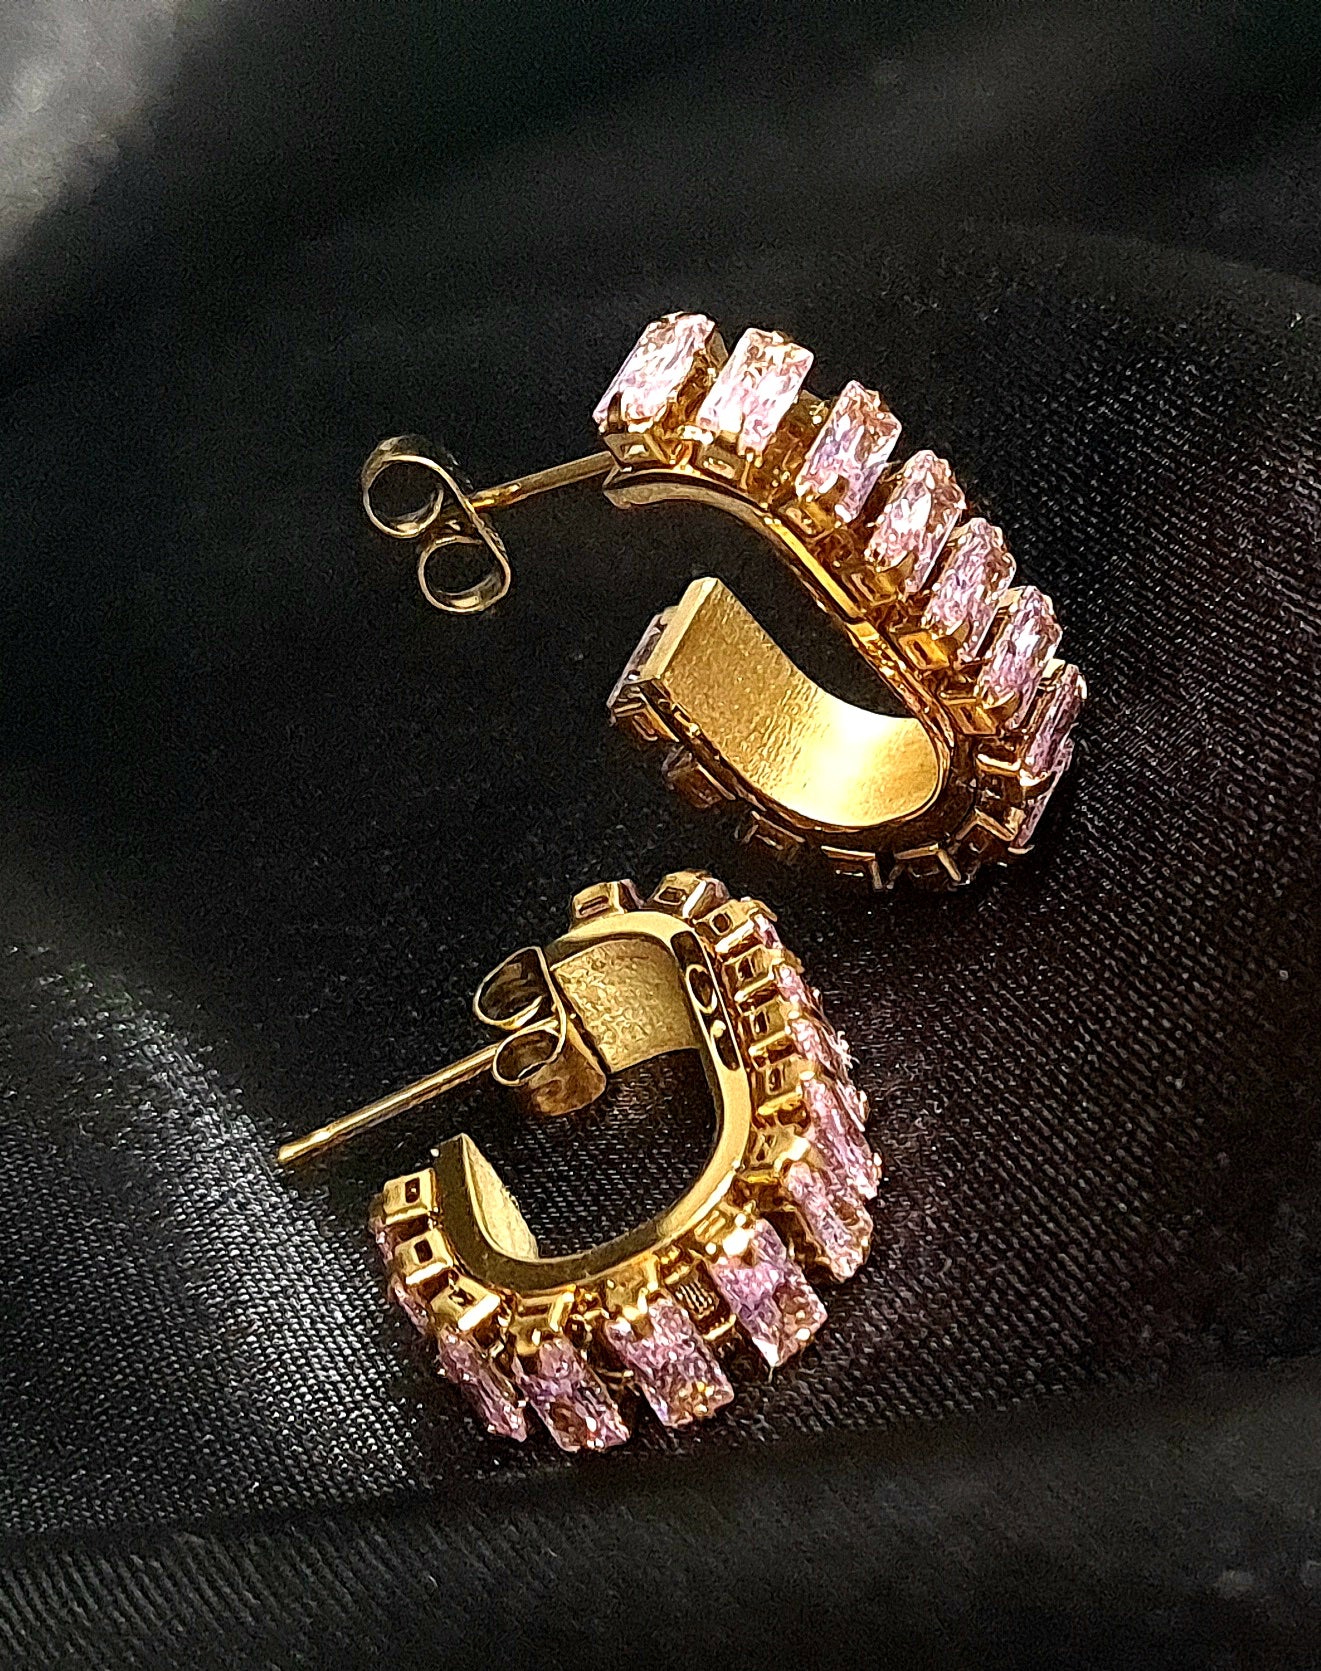 A pair of gold geometric design hoop earrings with pink cubic zirconia stones on a black cloth.